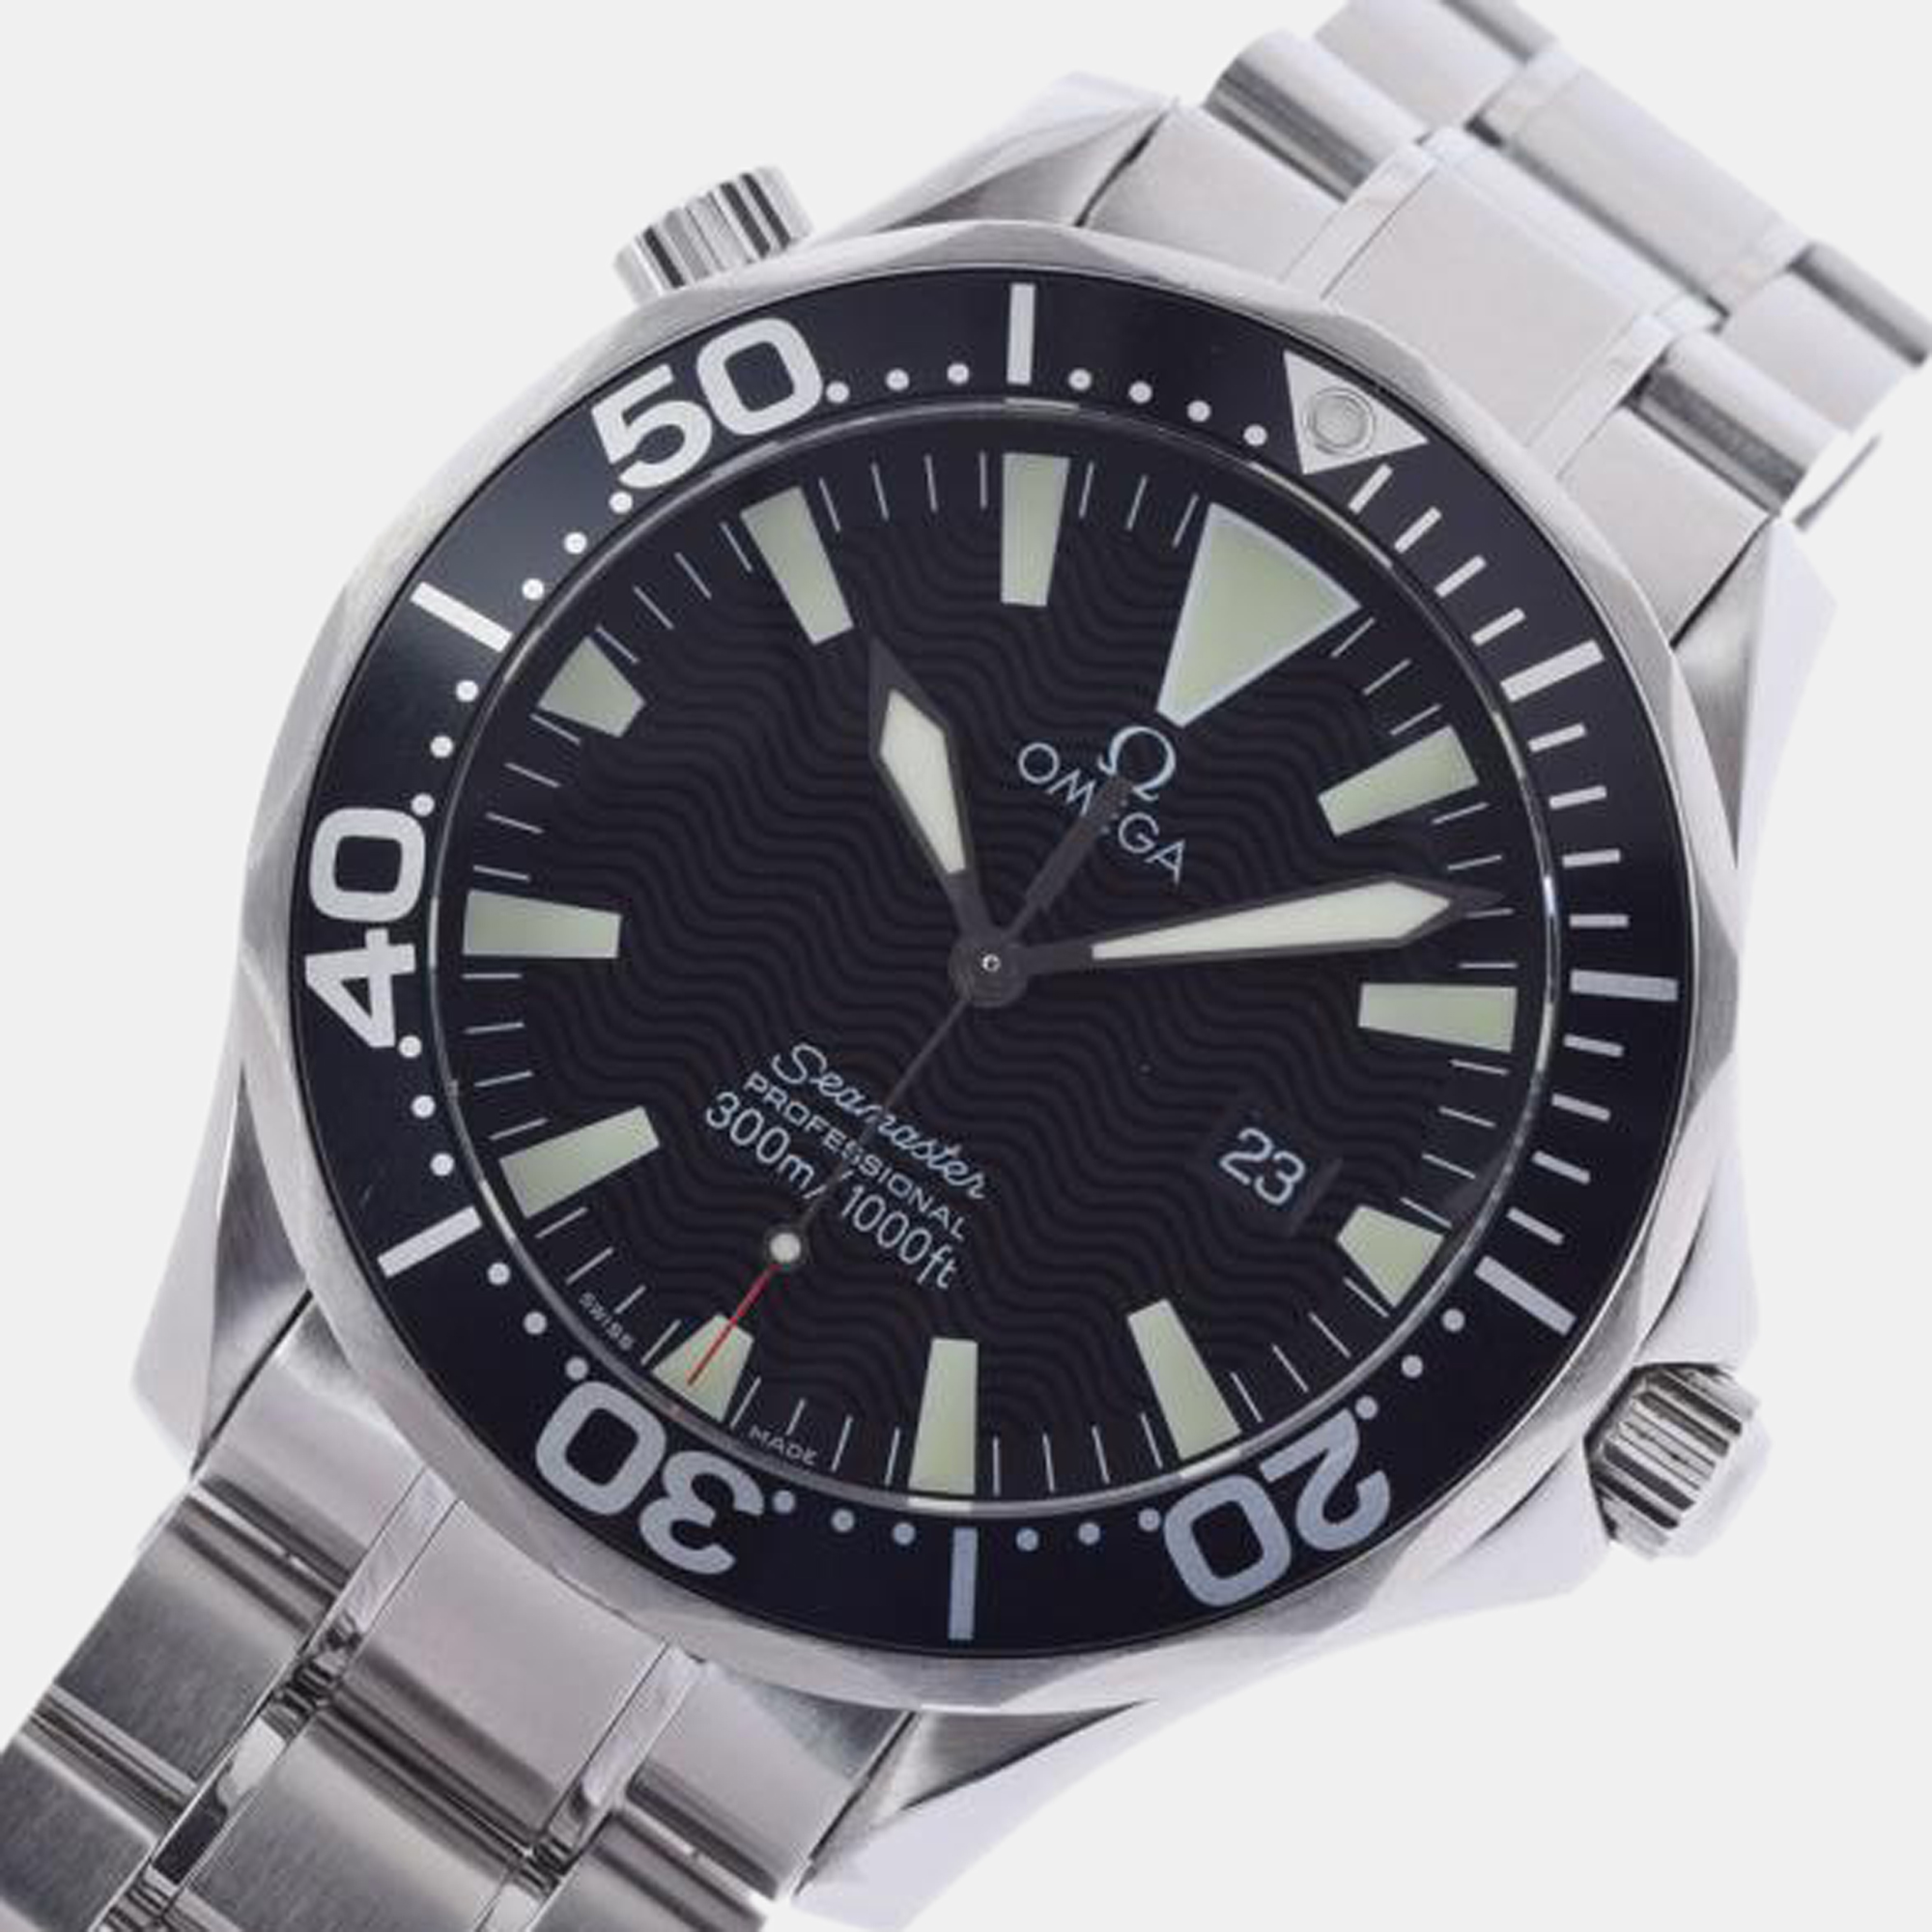 

Omega Black Stainless Steel Seamaster Professional 2264.50 Automatic Men's Wristwatch 41 mm